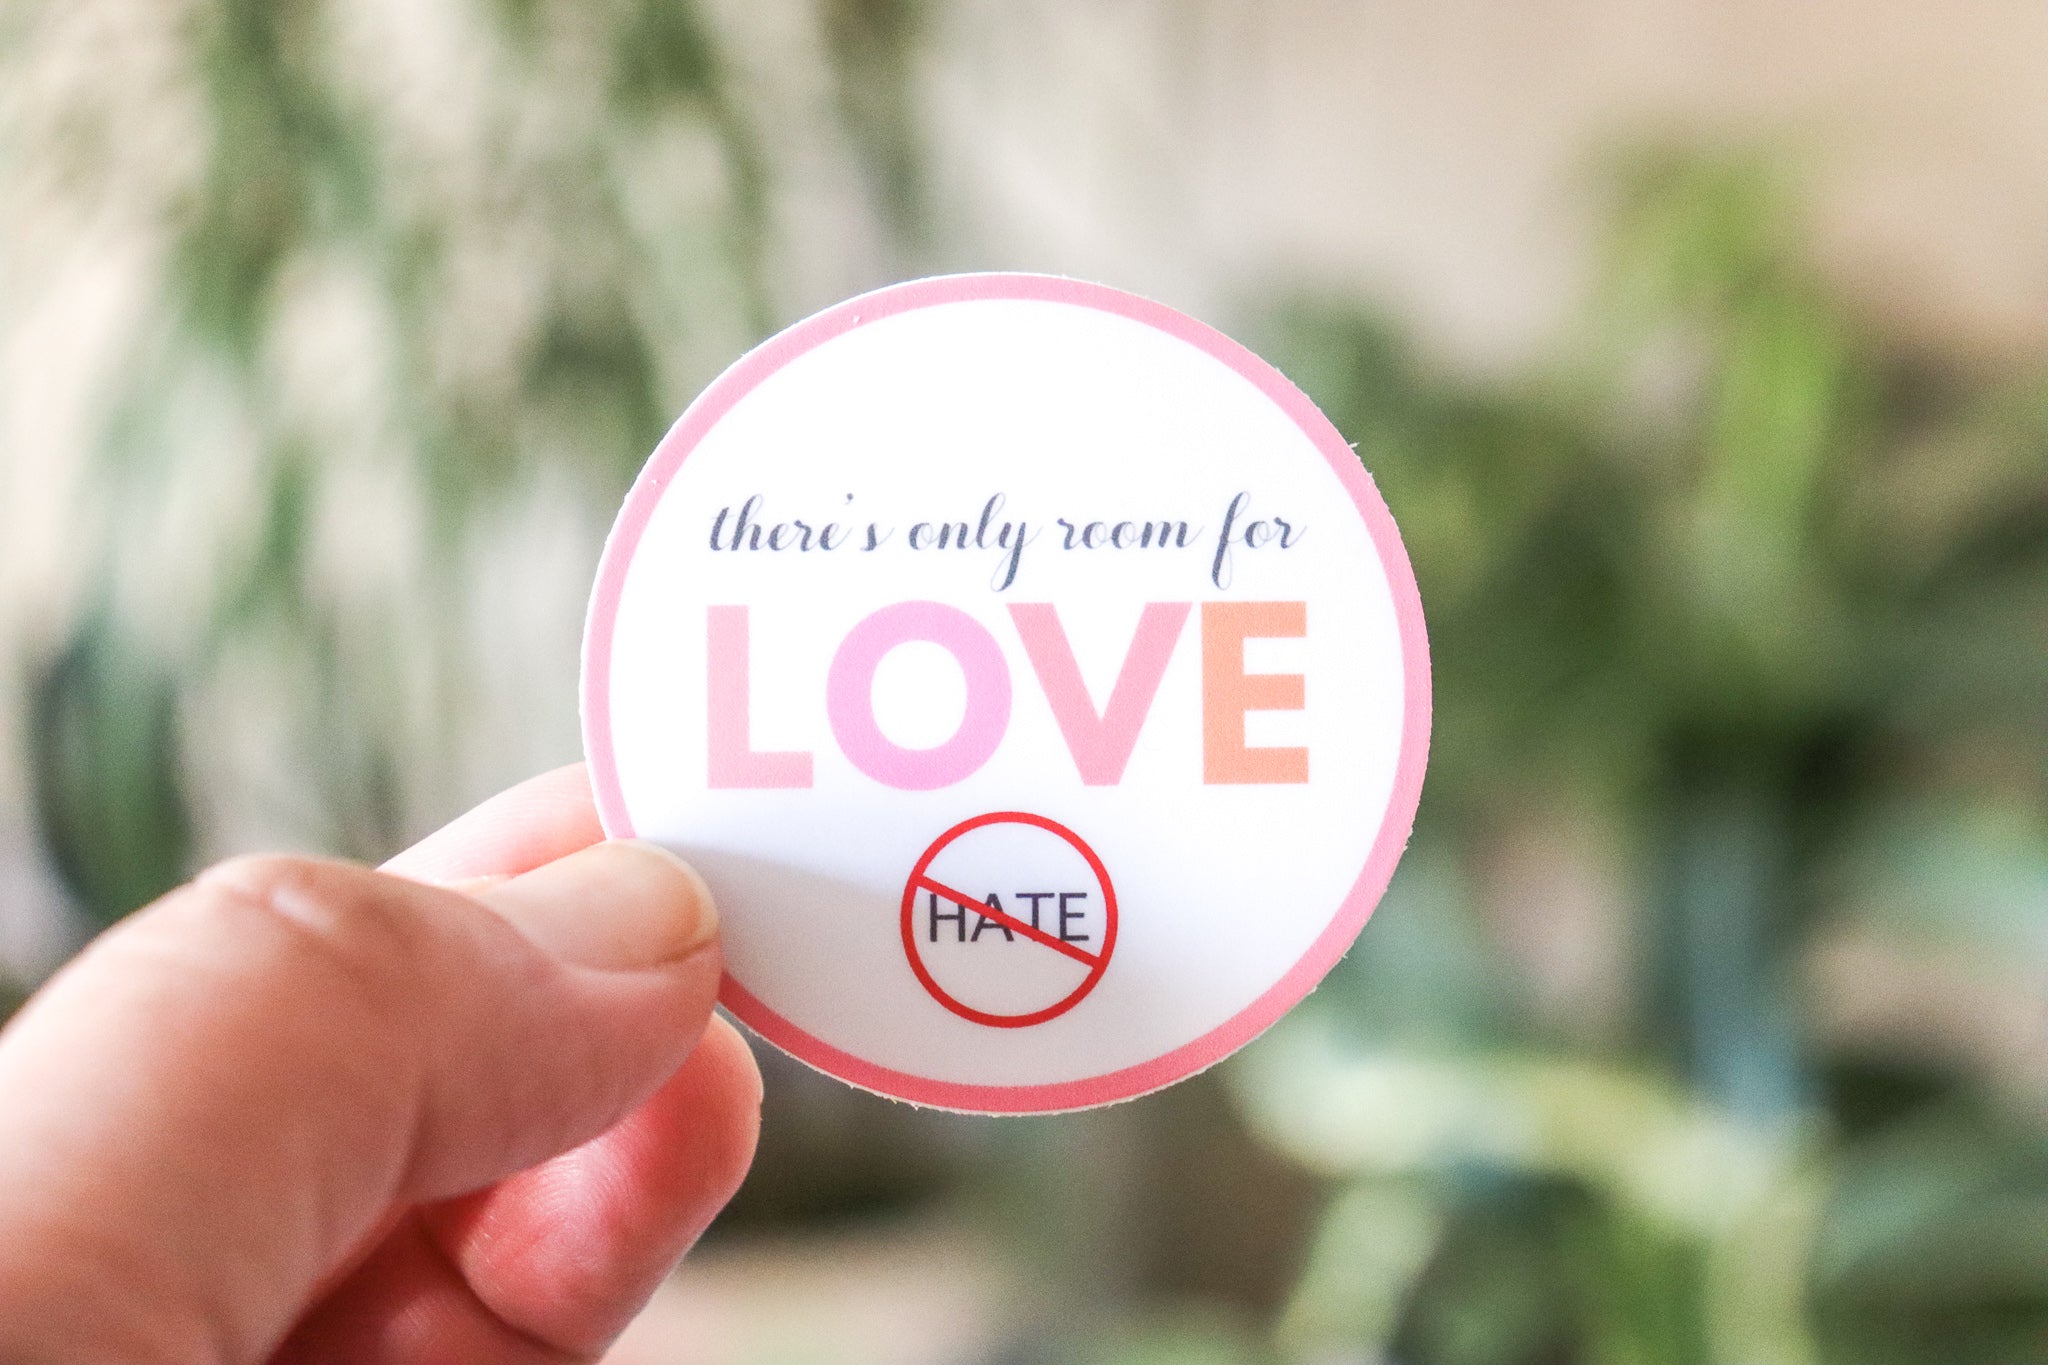 there's only room for LOVE sticker - shop with purpose